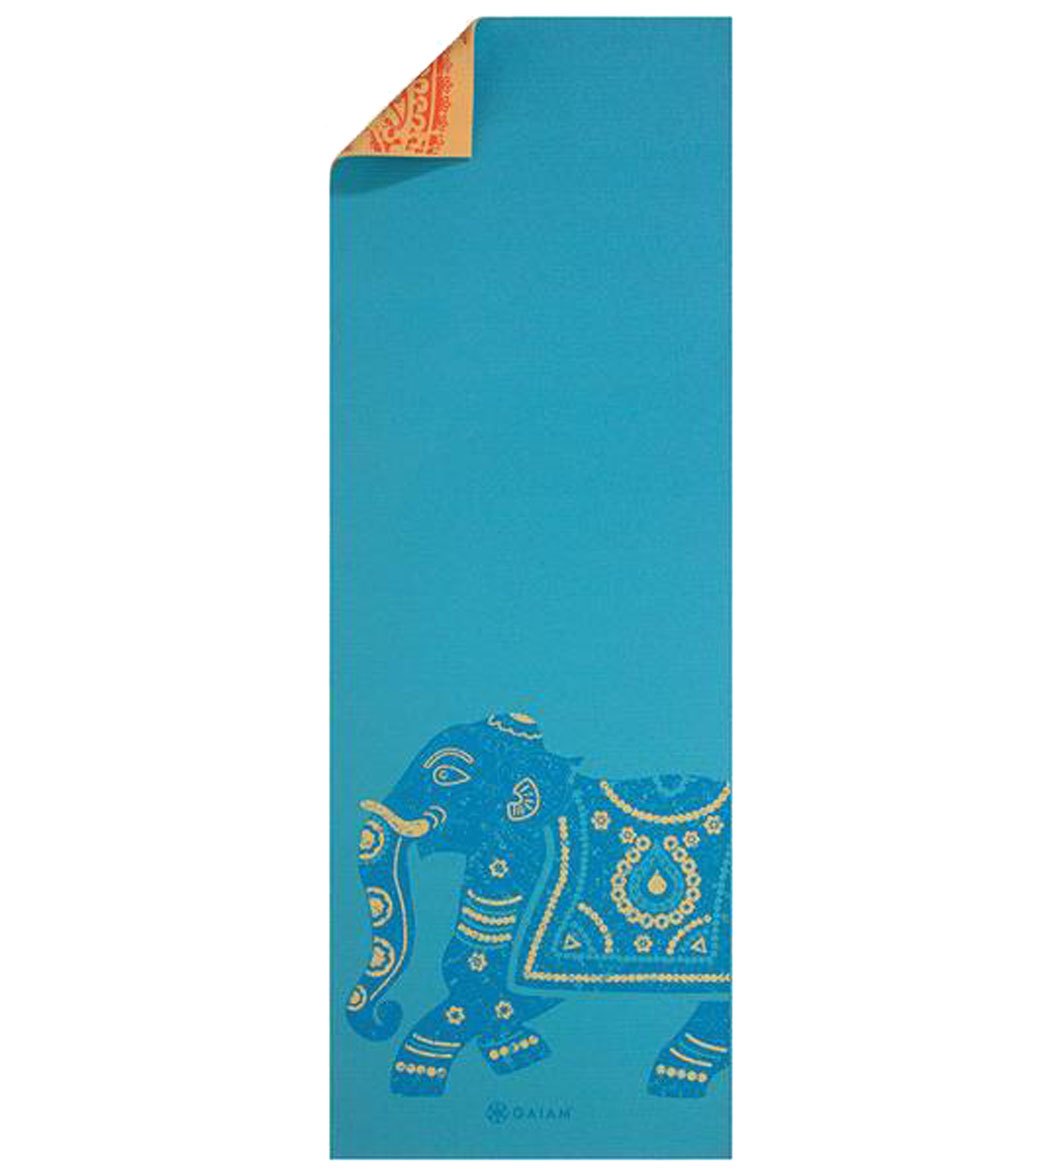 Gaiam Reversible Elephant Printed Yoga Mat 68 6mm Extra Thick at